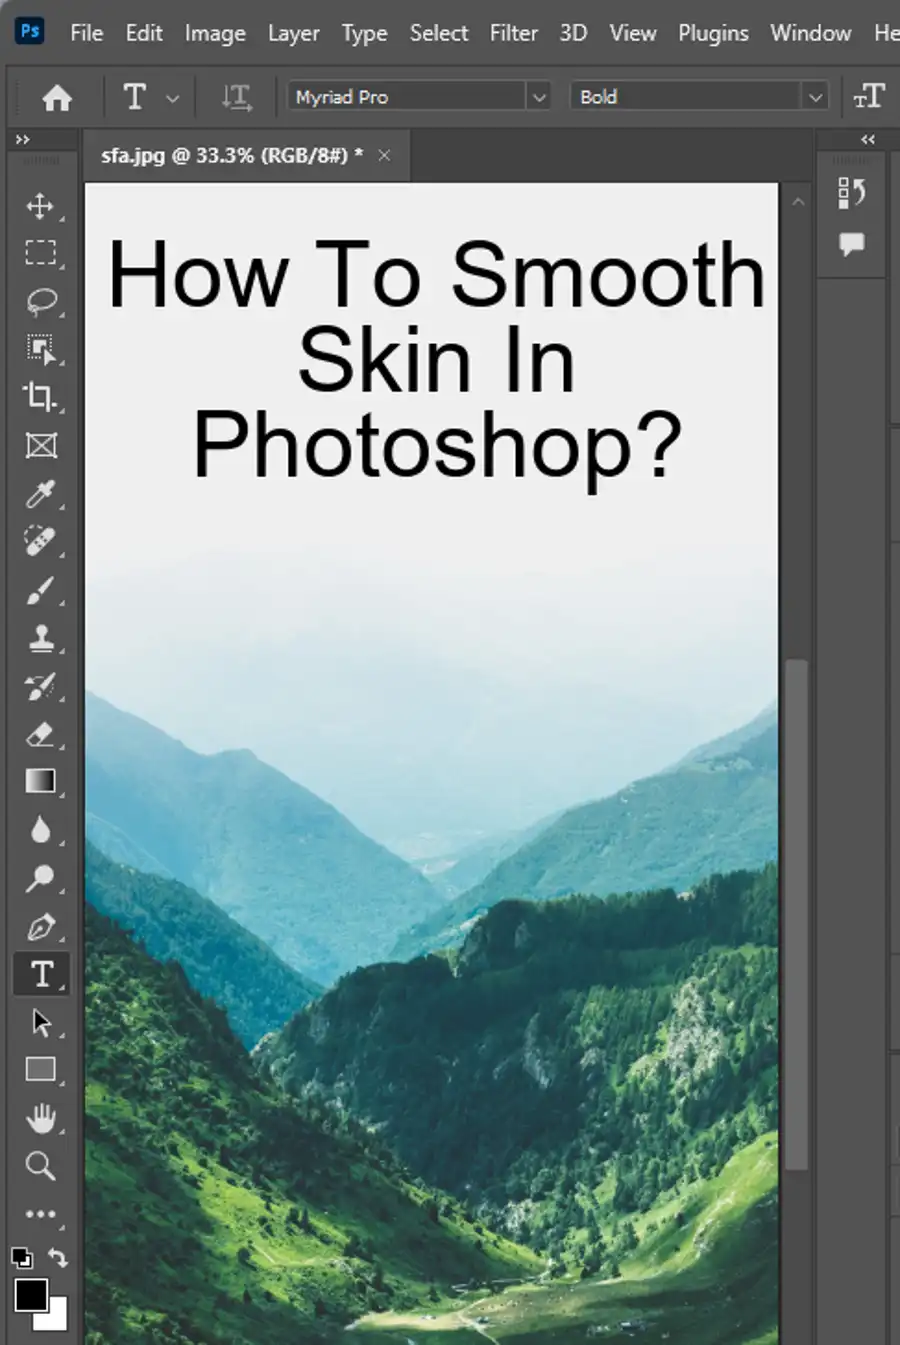 Smooth skin in your images